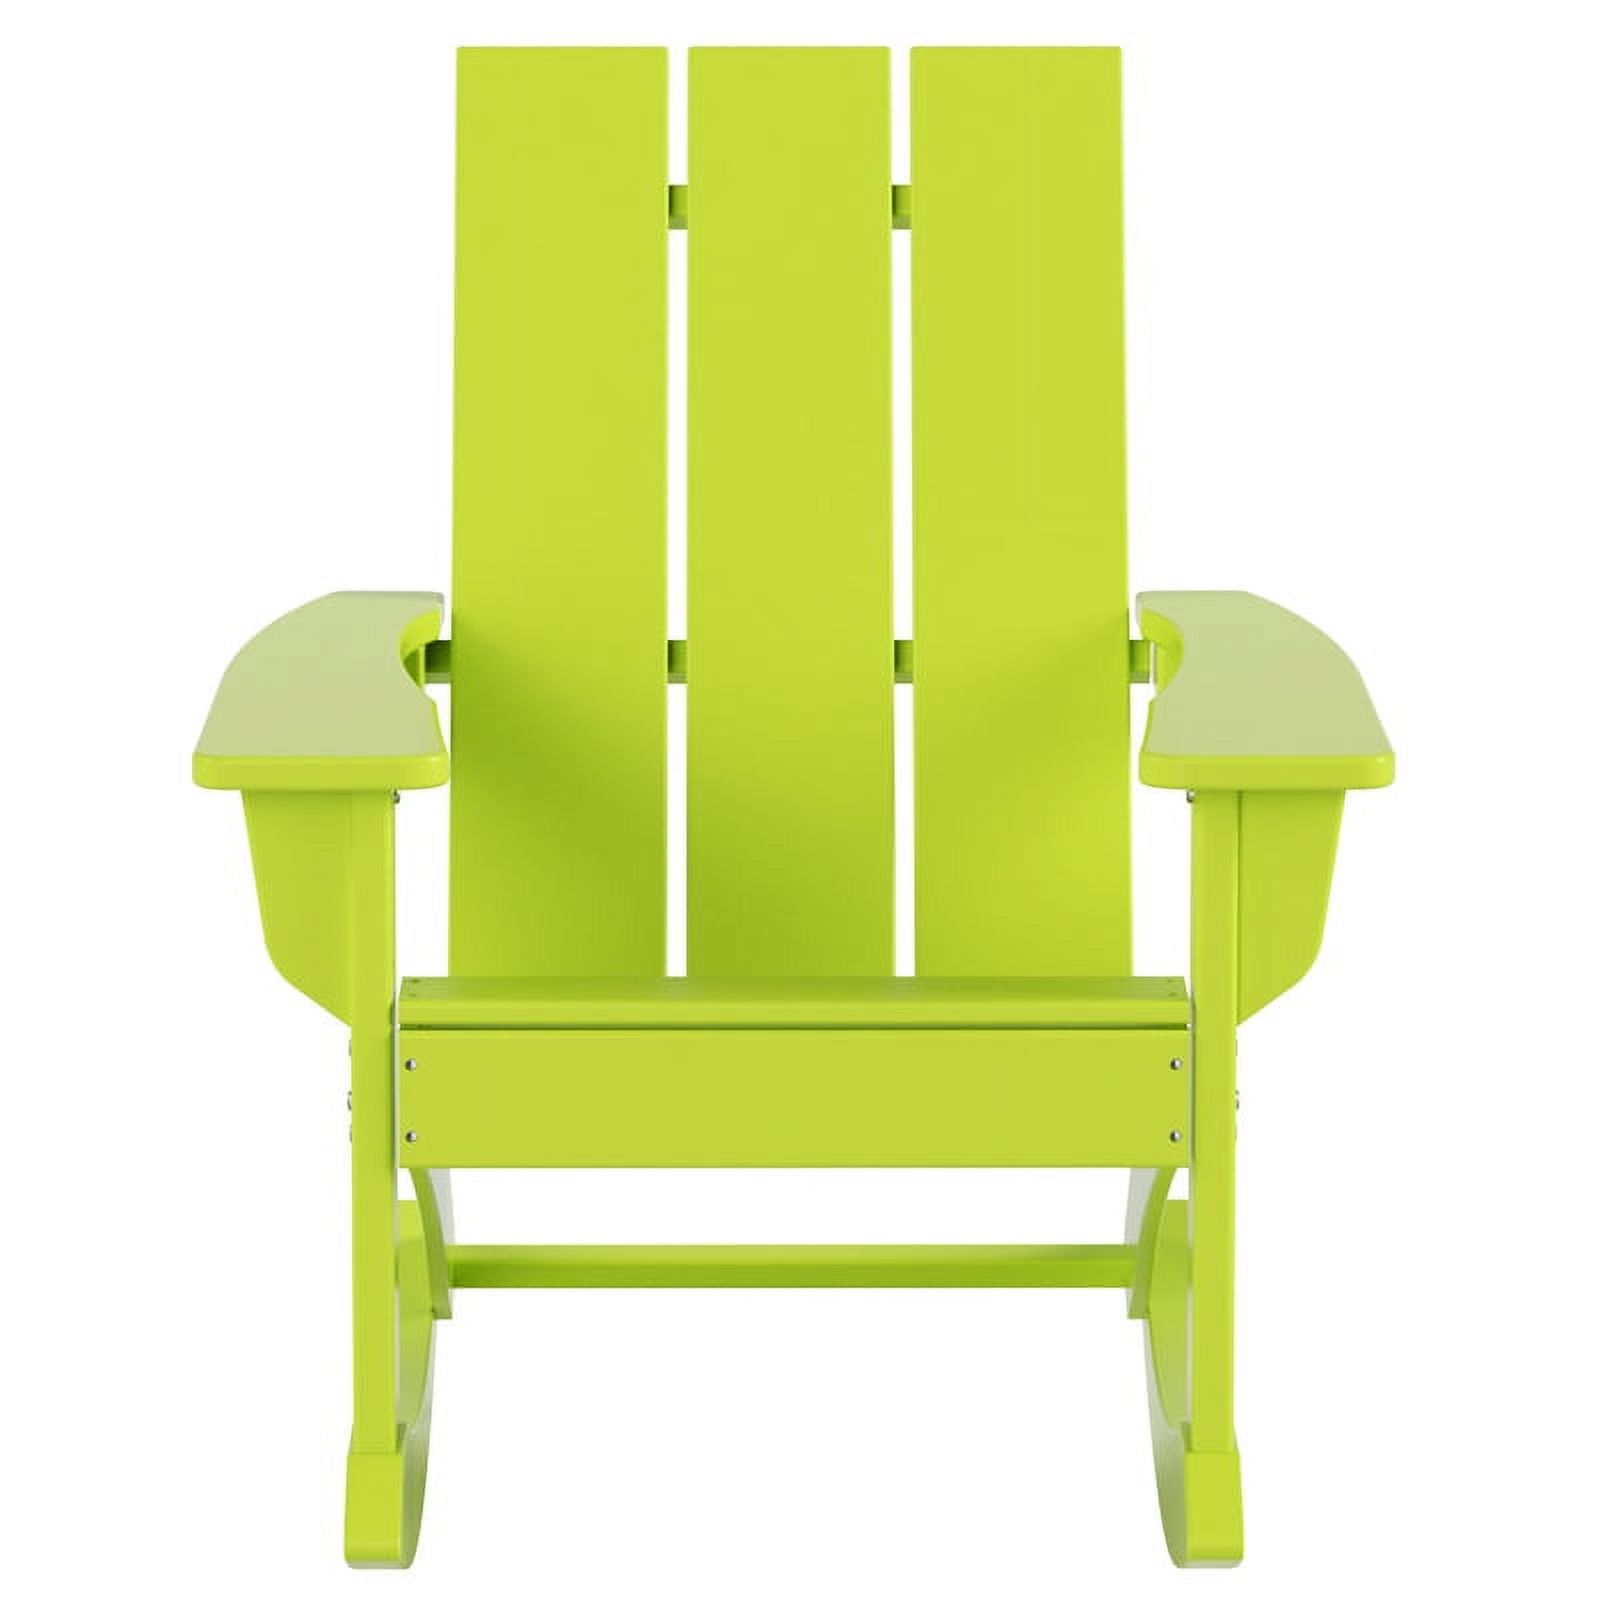 Costaelm Palms Outdoor HDPE Plastic Adirondack Rocking Chair (Set of 2), Lime - image 4 of 8